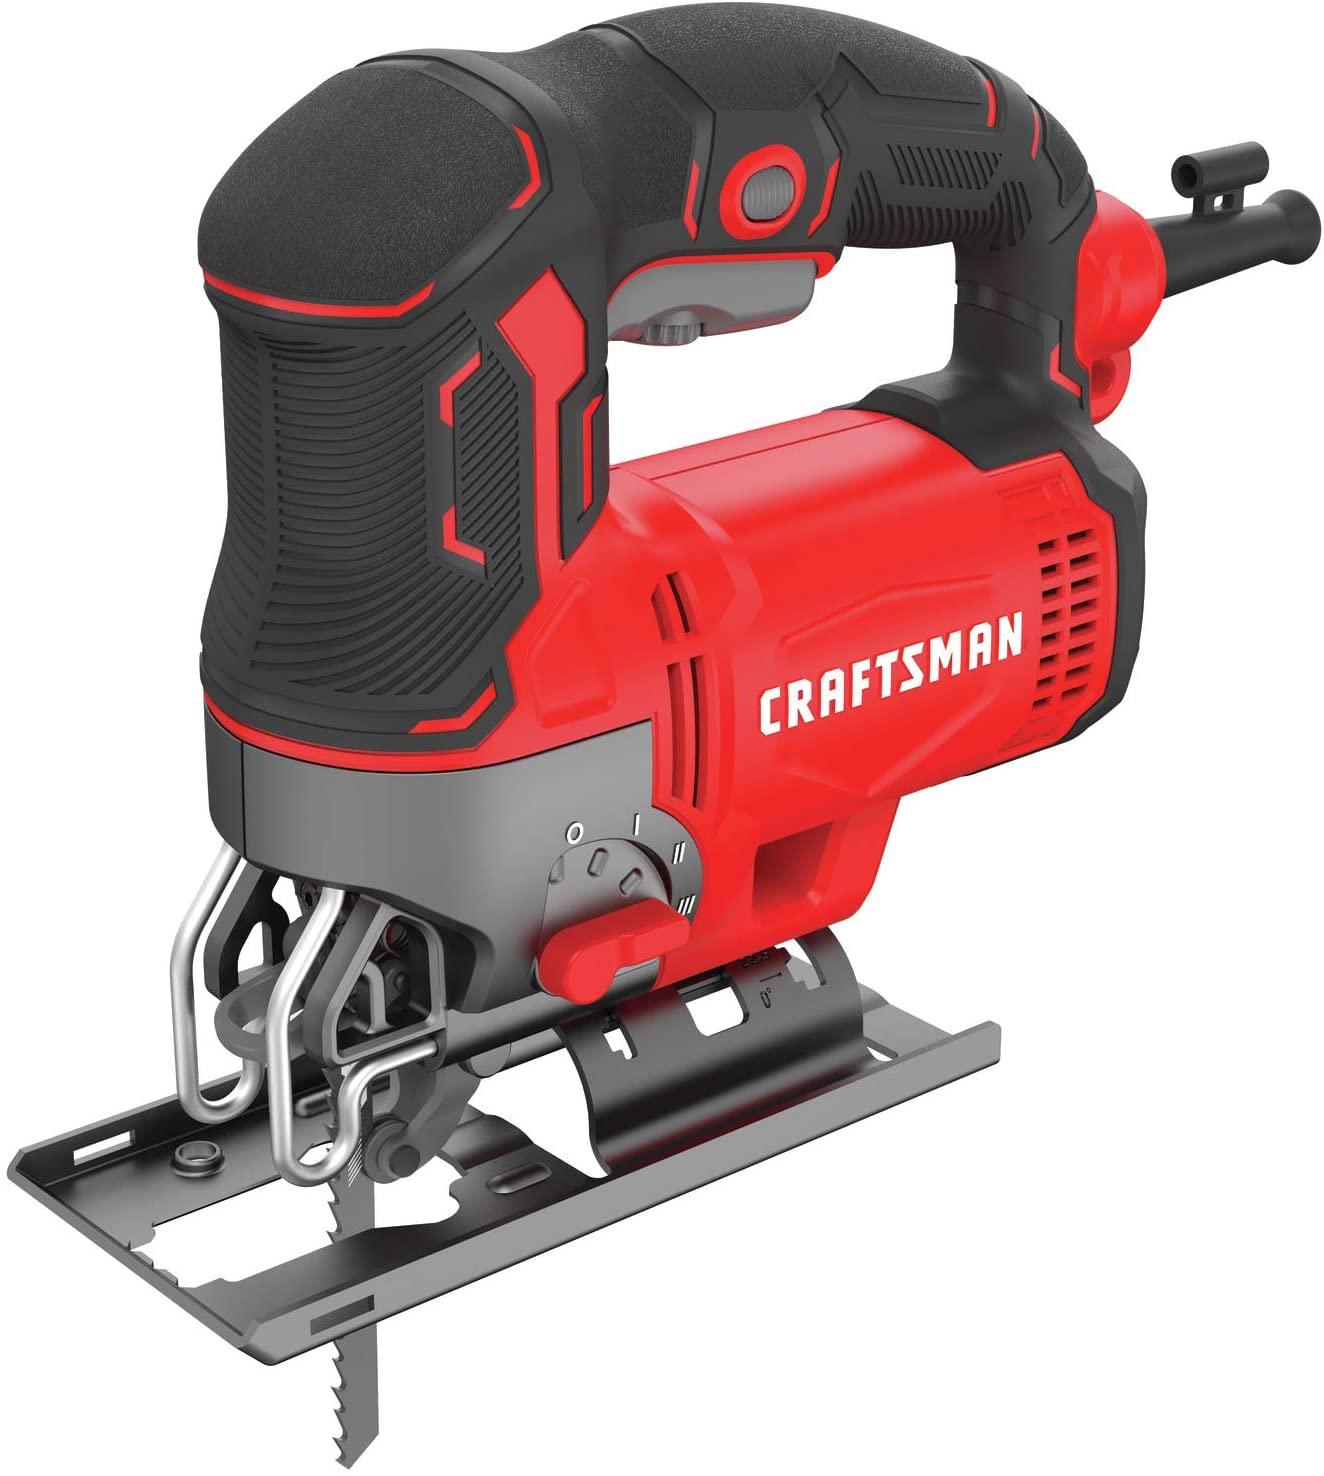 CRAFTSMAN - Best Jigsaw tool in 2022: Power Up Your Cutting Ability with these Ultimate Handheld Saws - HandyMan.Guide - Jigsaw